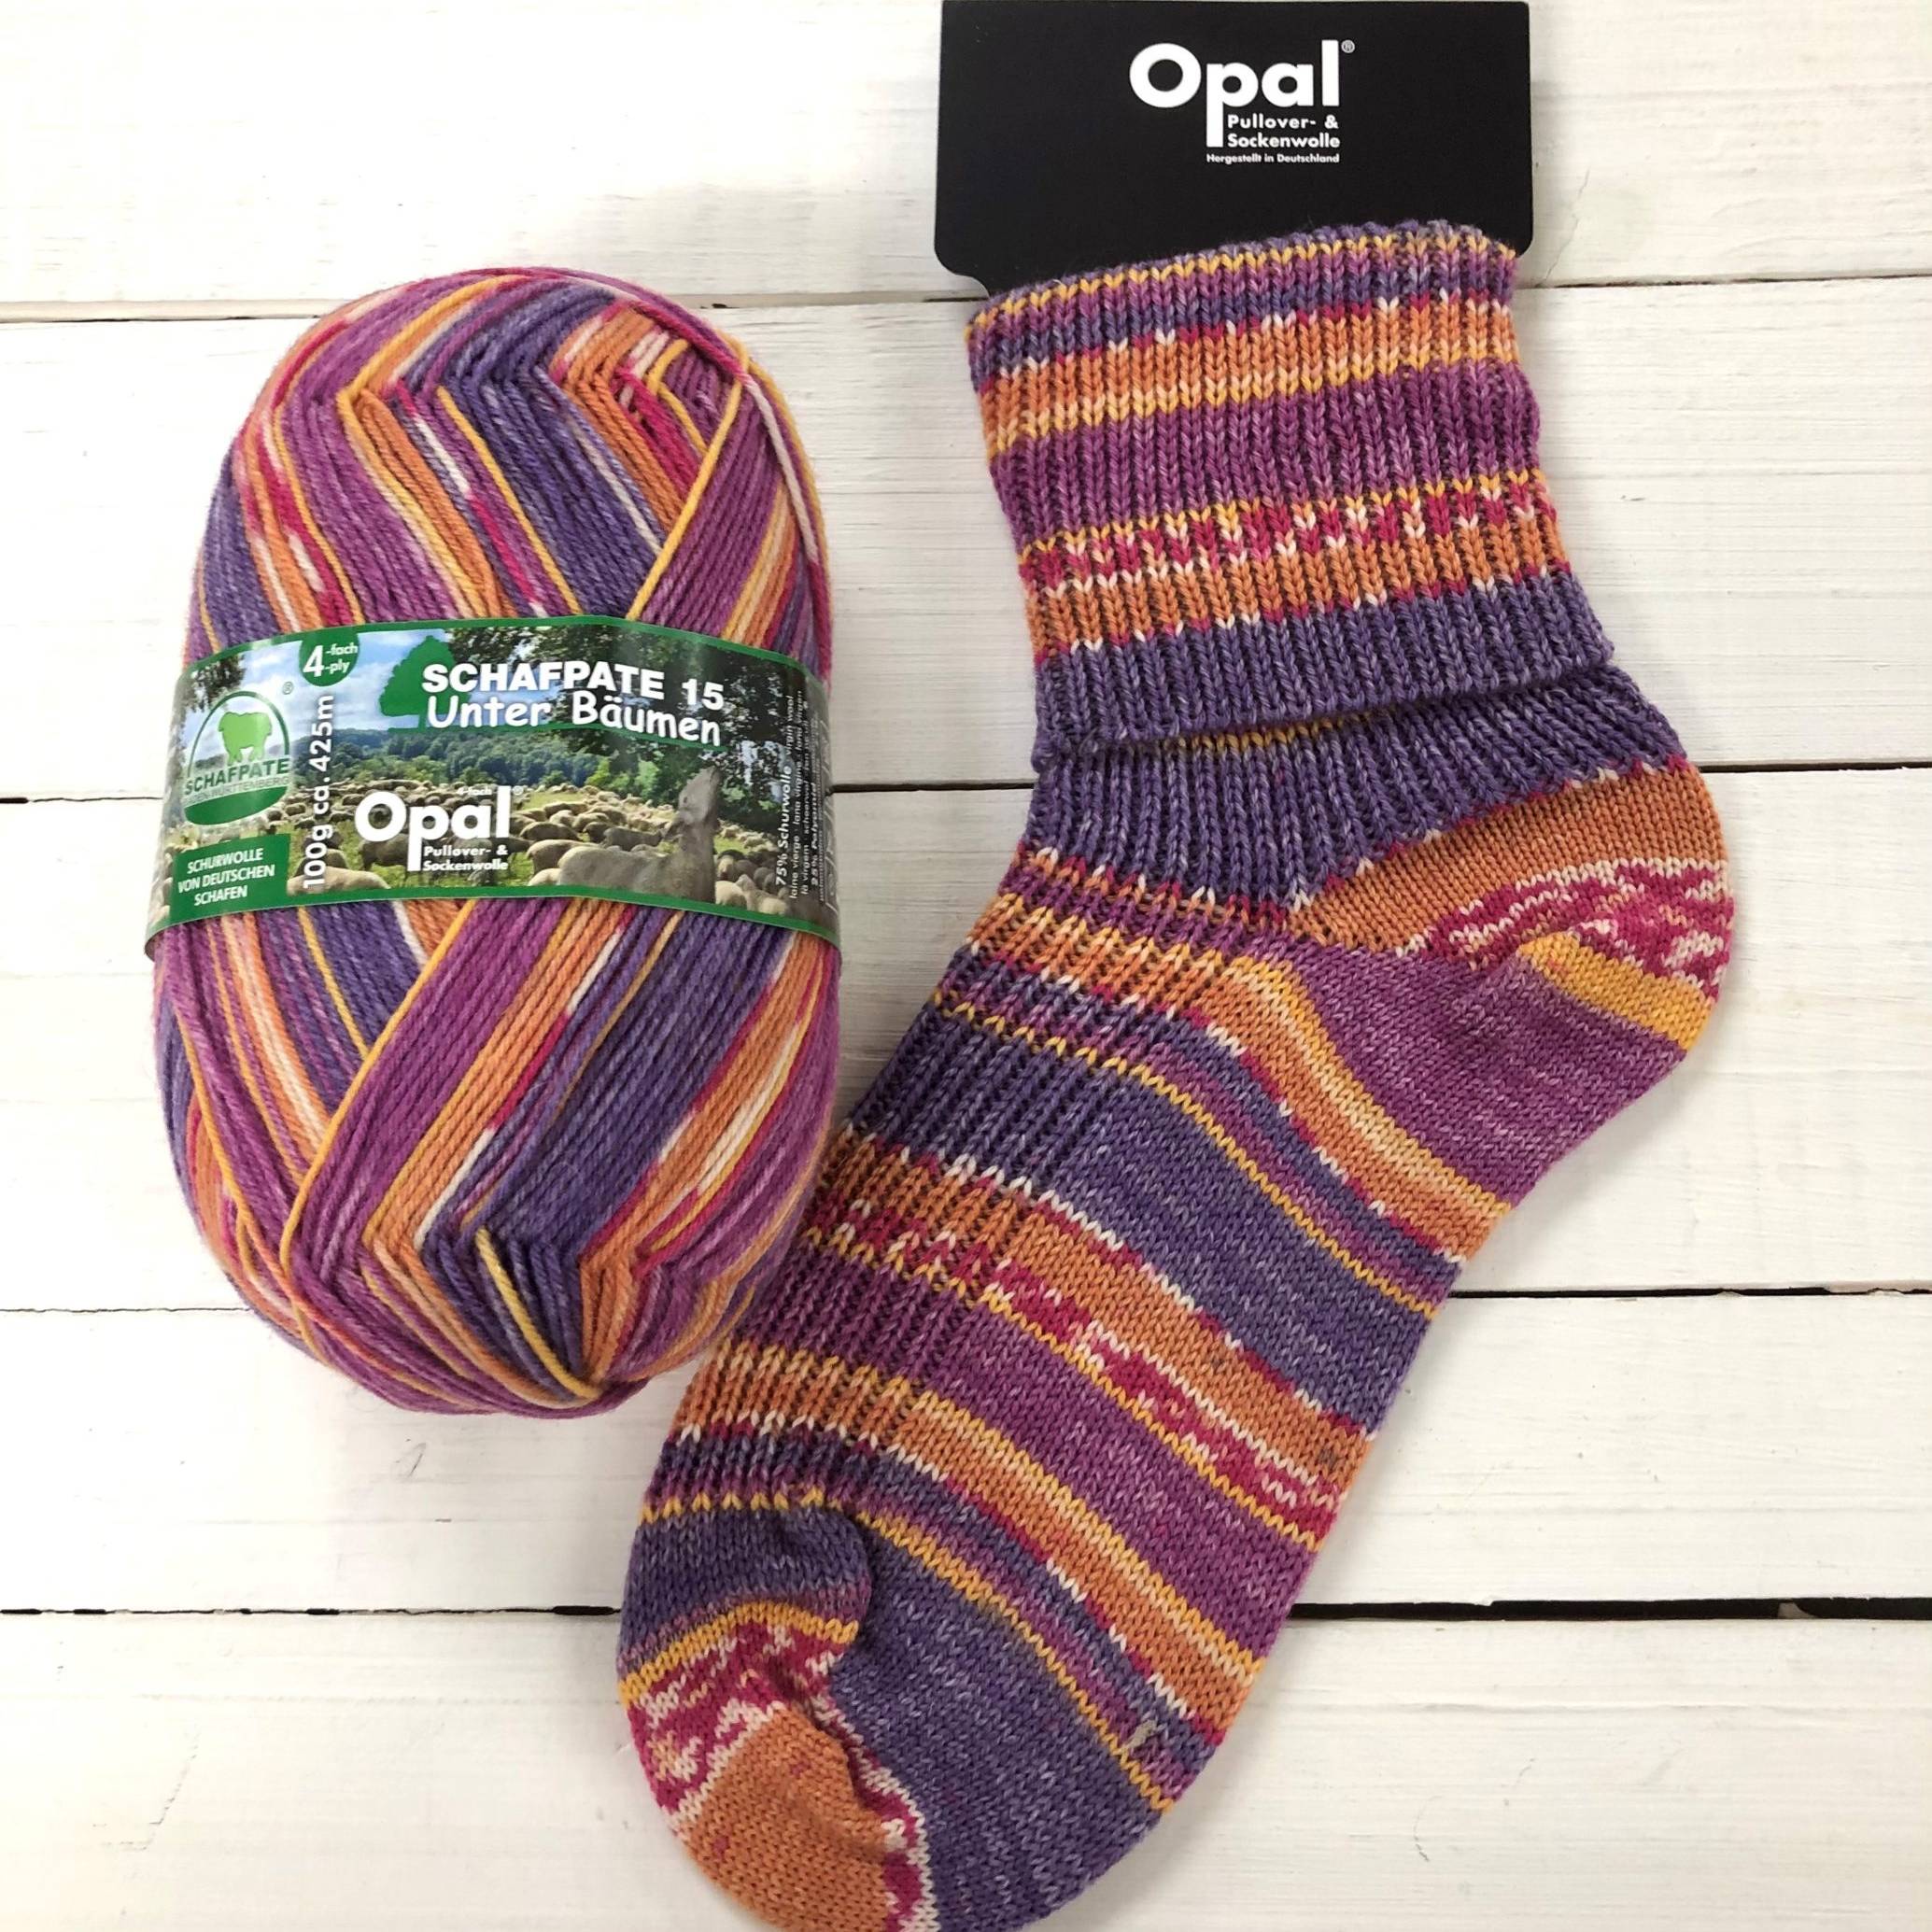 Opal Schafpate 4-Ply - Nibble The Branches (11360)